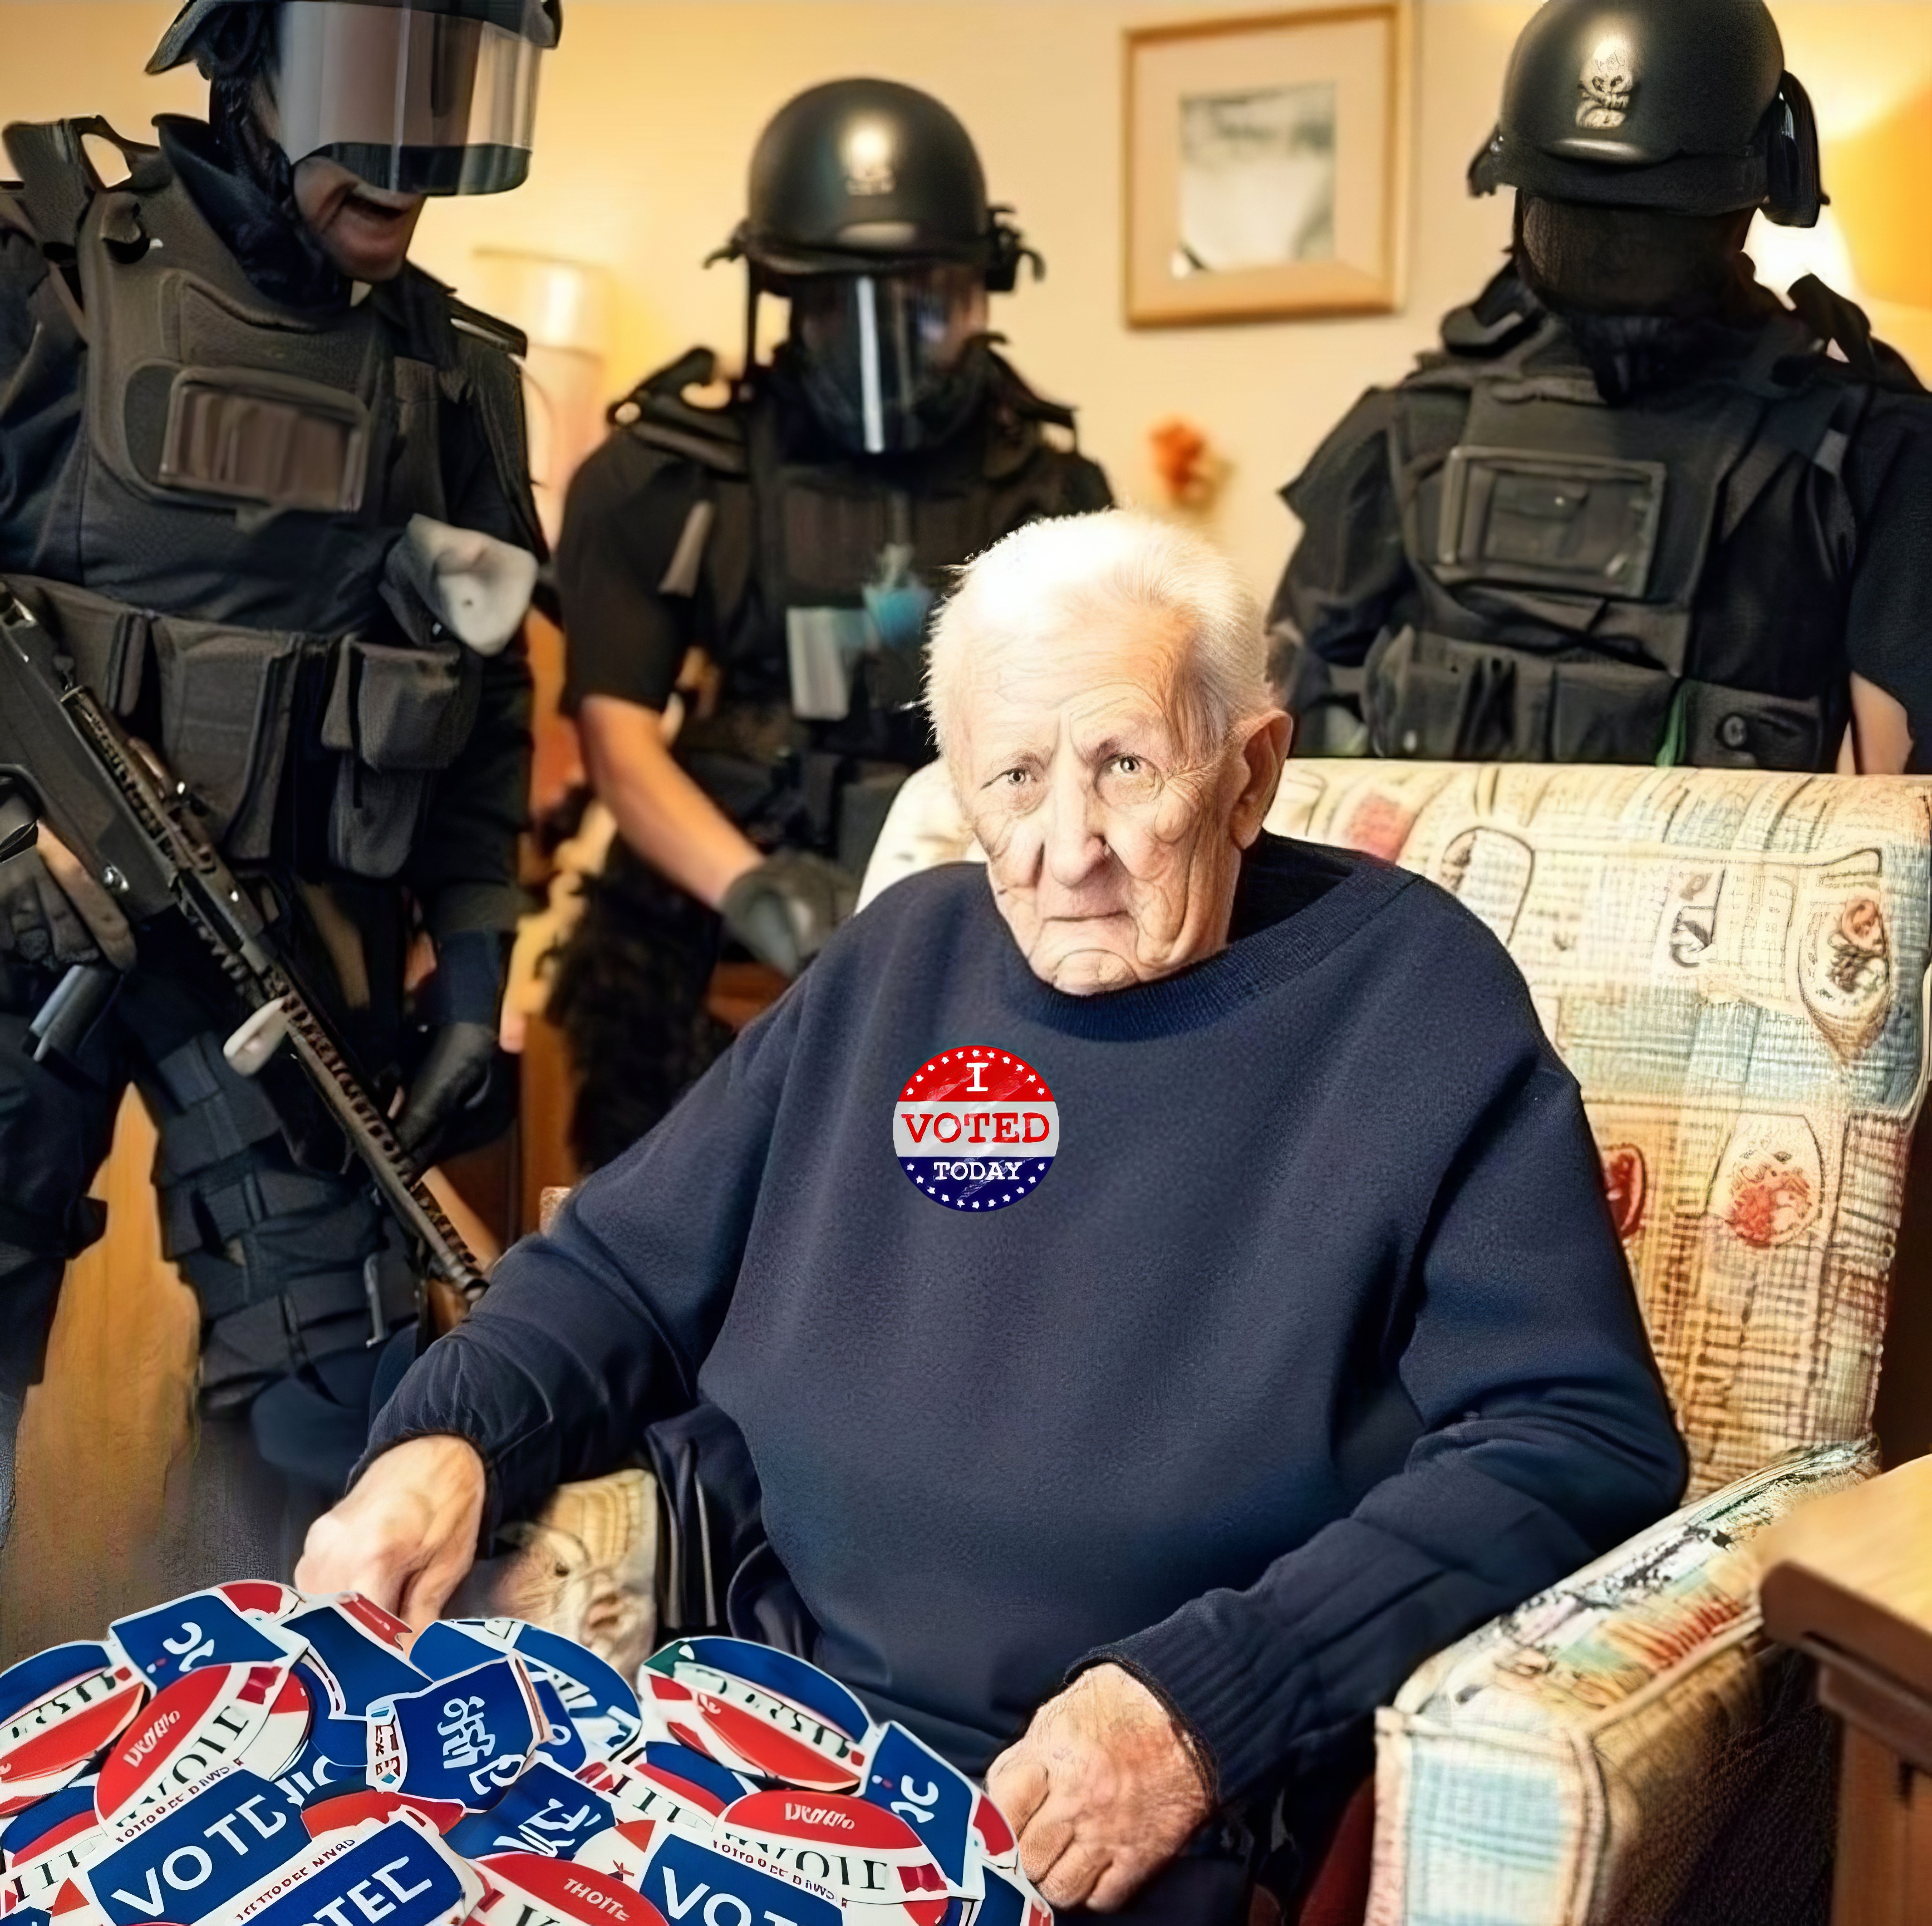 An elderly man wearing an 'I Voted' sticker is surrounded by an armed SWAT team.